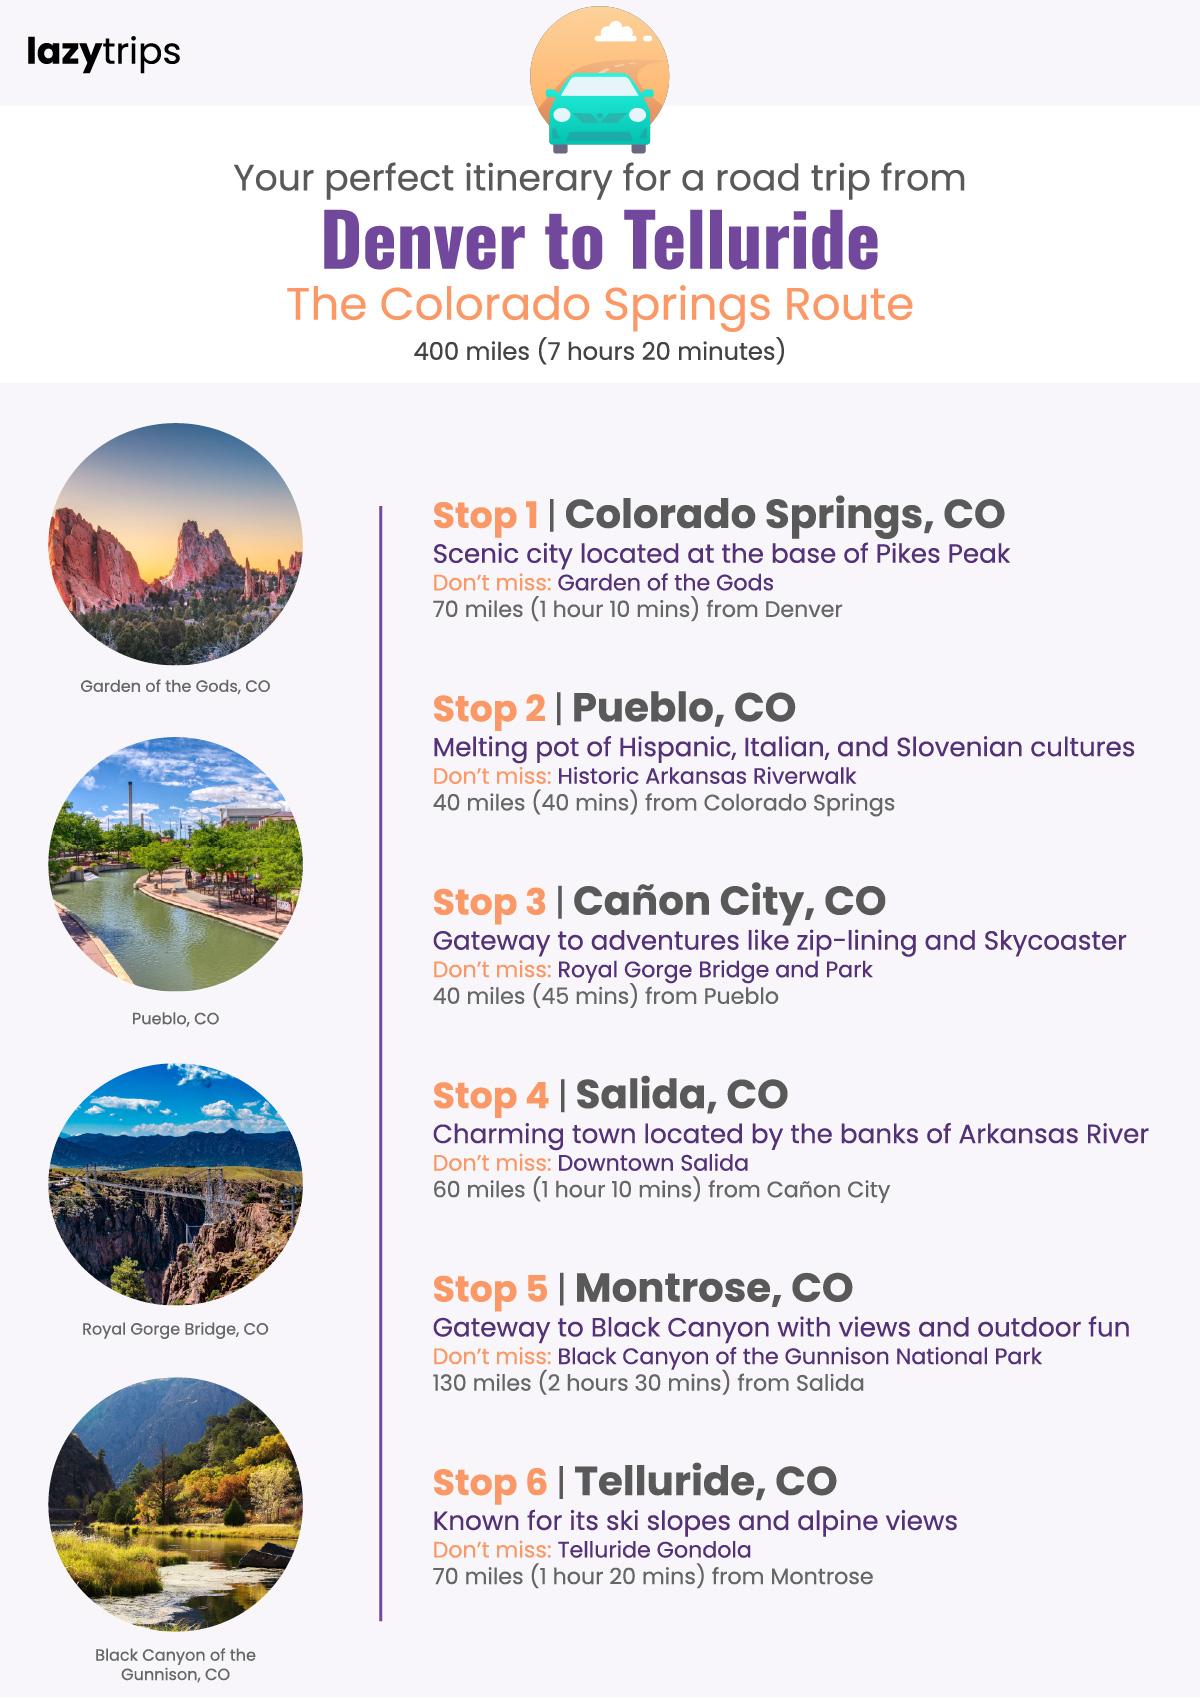 Itinerary for a road trip from Denver to Telluride, stopping in Colorado Springs, Pueblo, Canon City, Salida, Montrose and Telluride